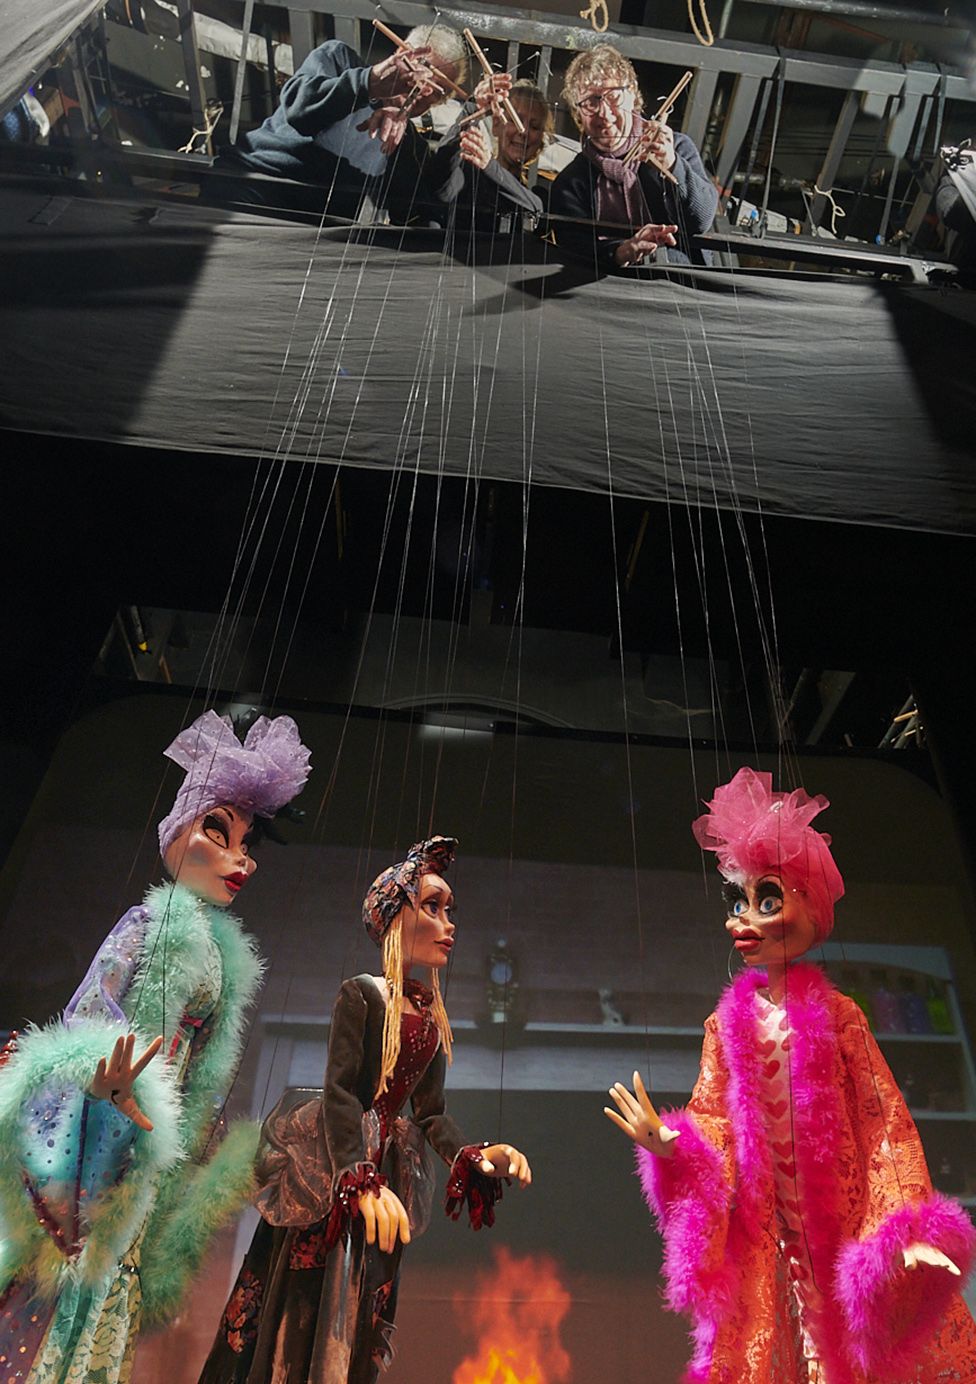 Puppeteers high above the stage at the Norwich Puppet Theatre operating Cinderella marionettes